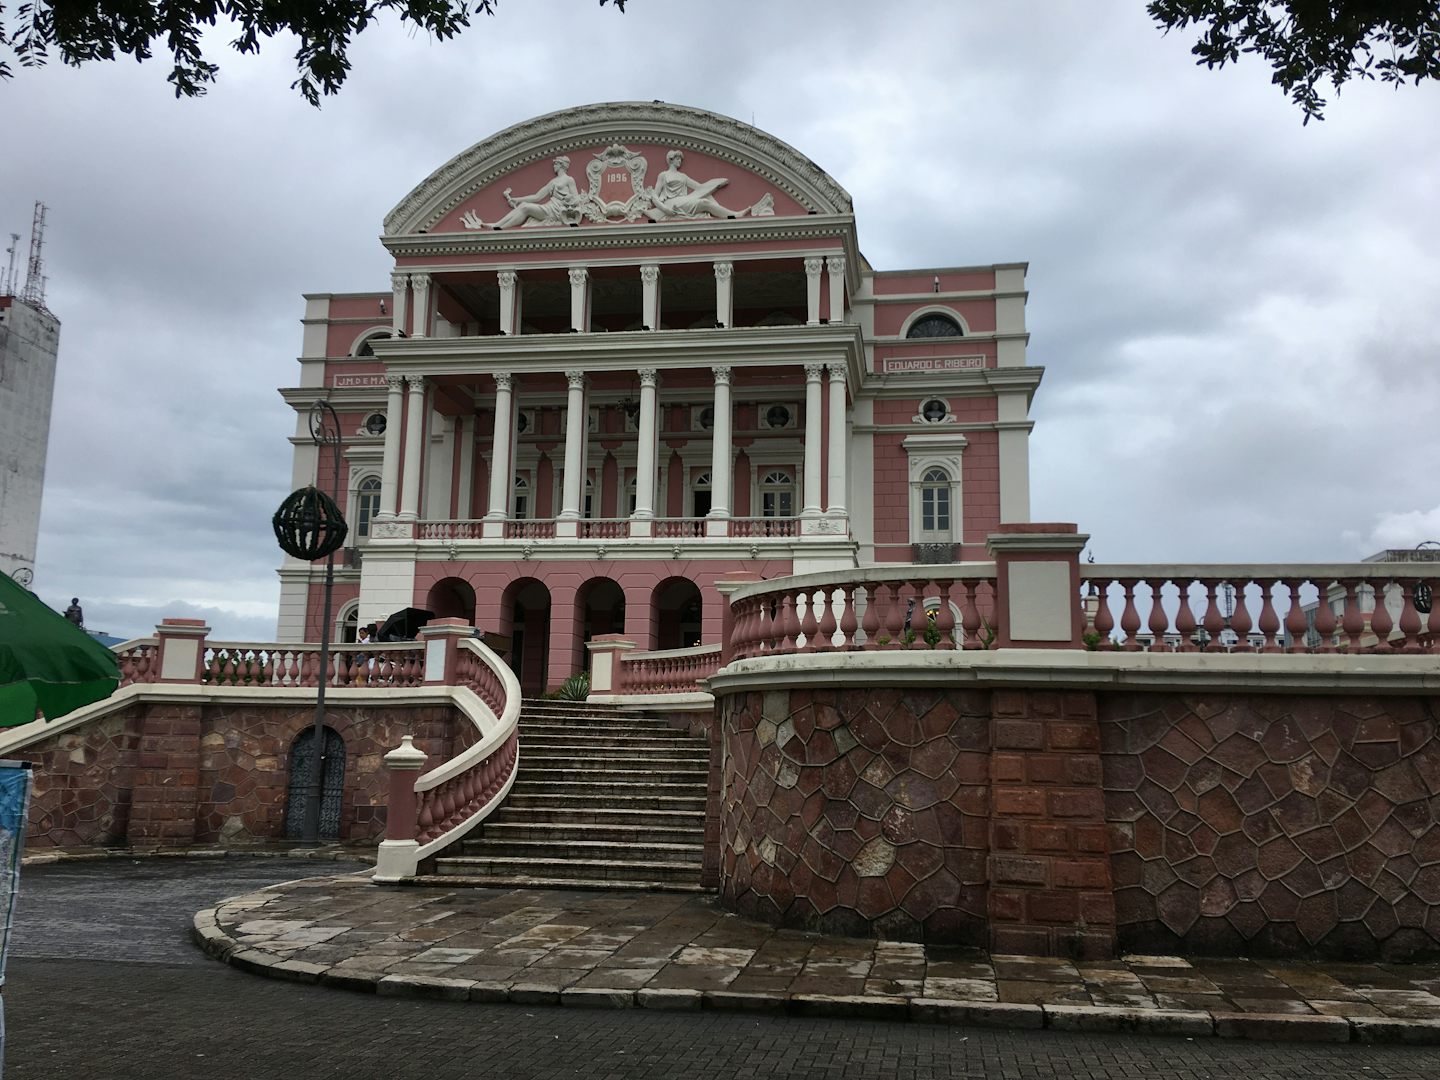 Opera Hall in Manaus, Brazil but we did not go inside. A disappointment. Th